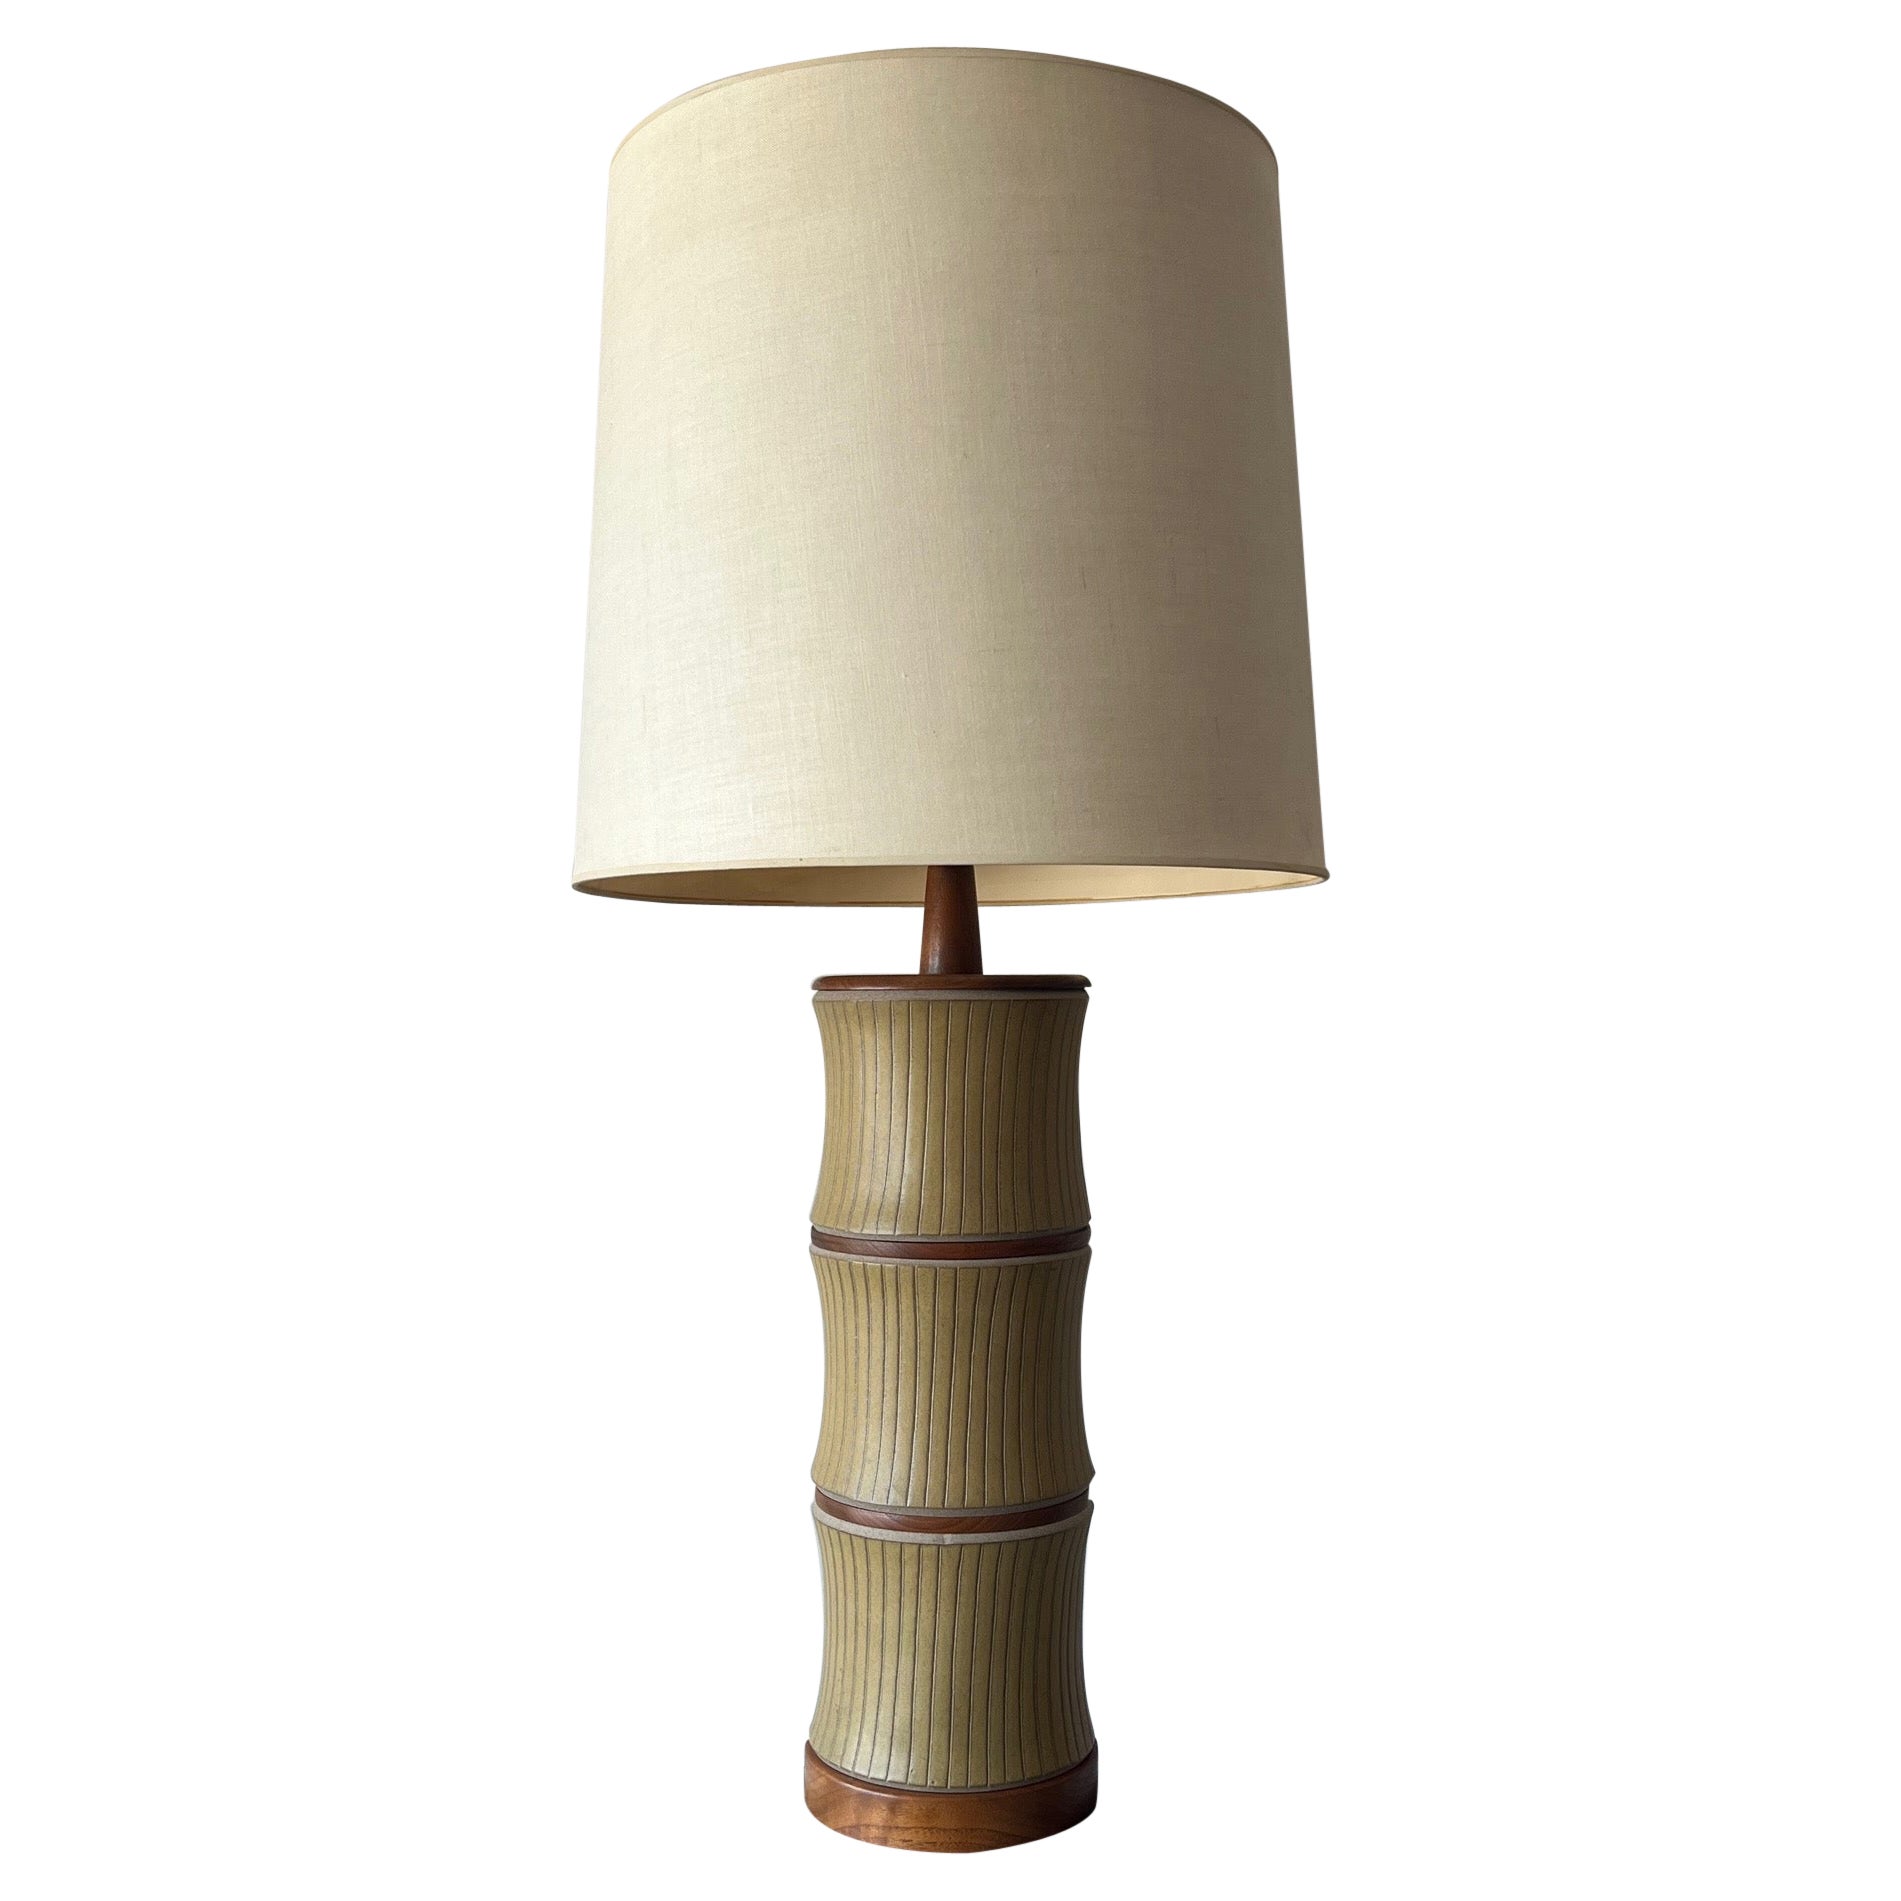 A Large Scale Martz Stoneware And Walnut Lamp For Sale